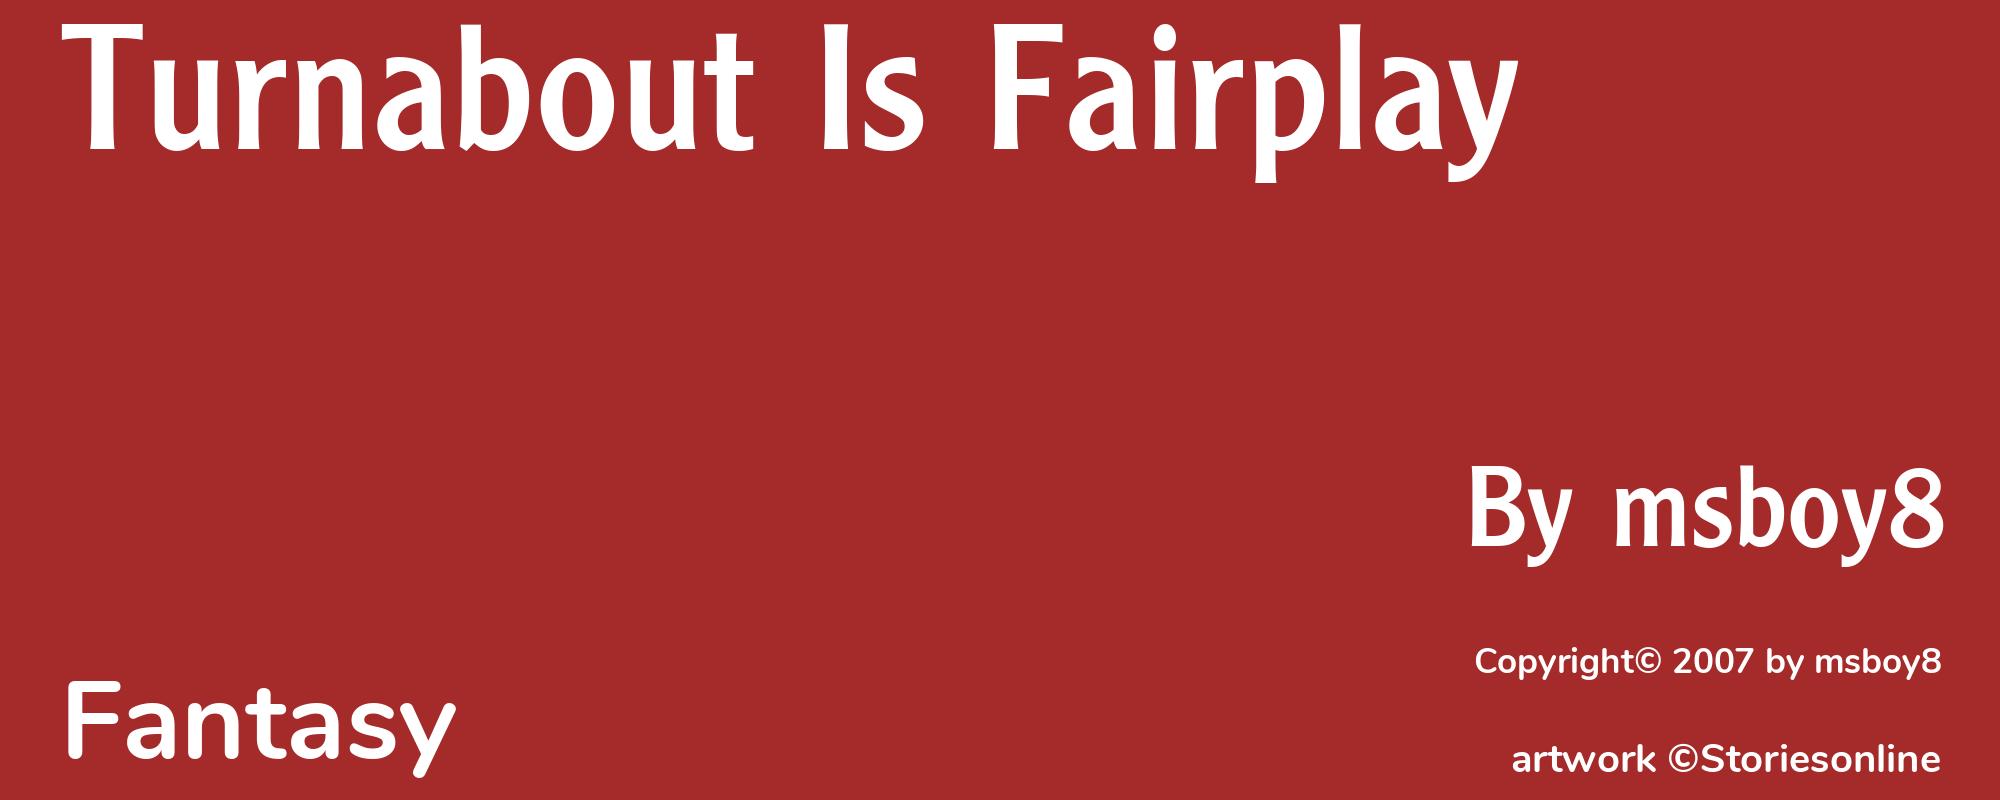 Turnabout Is Fairplay - Cover